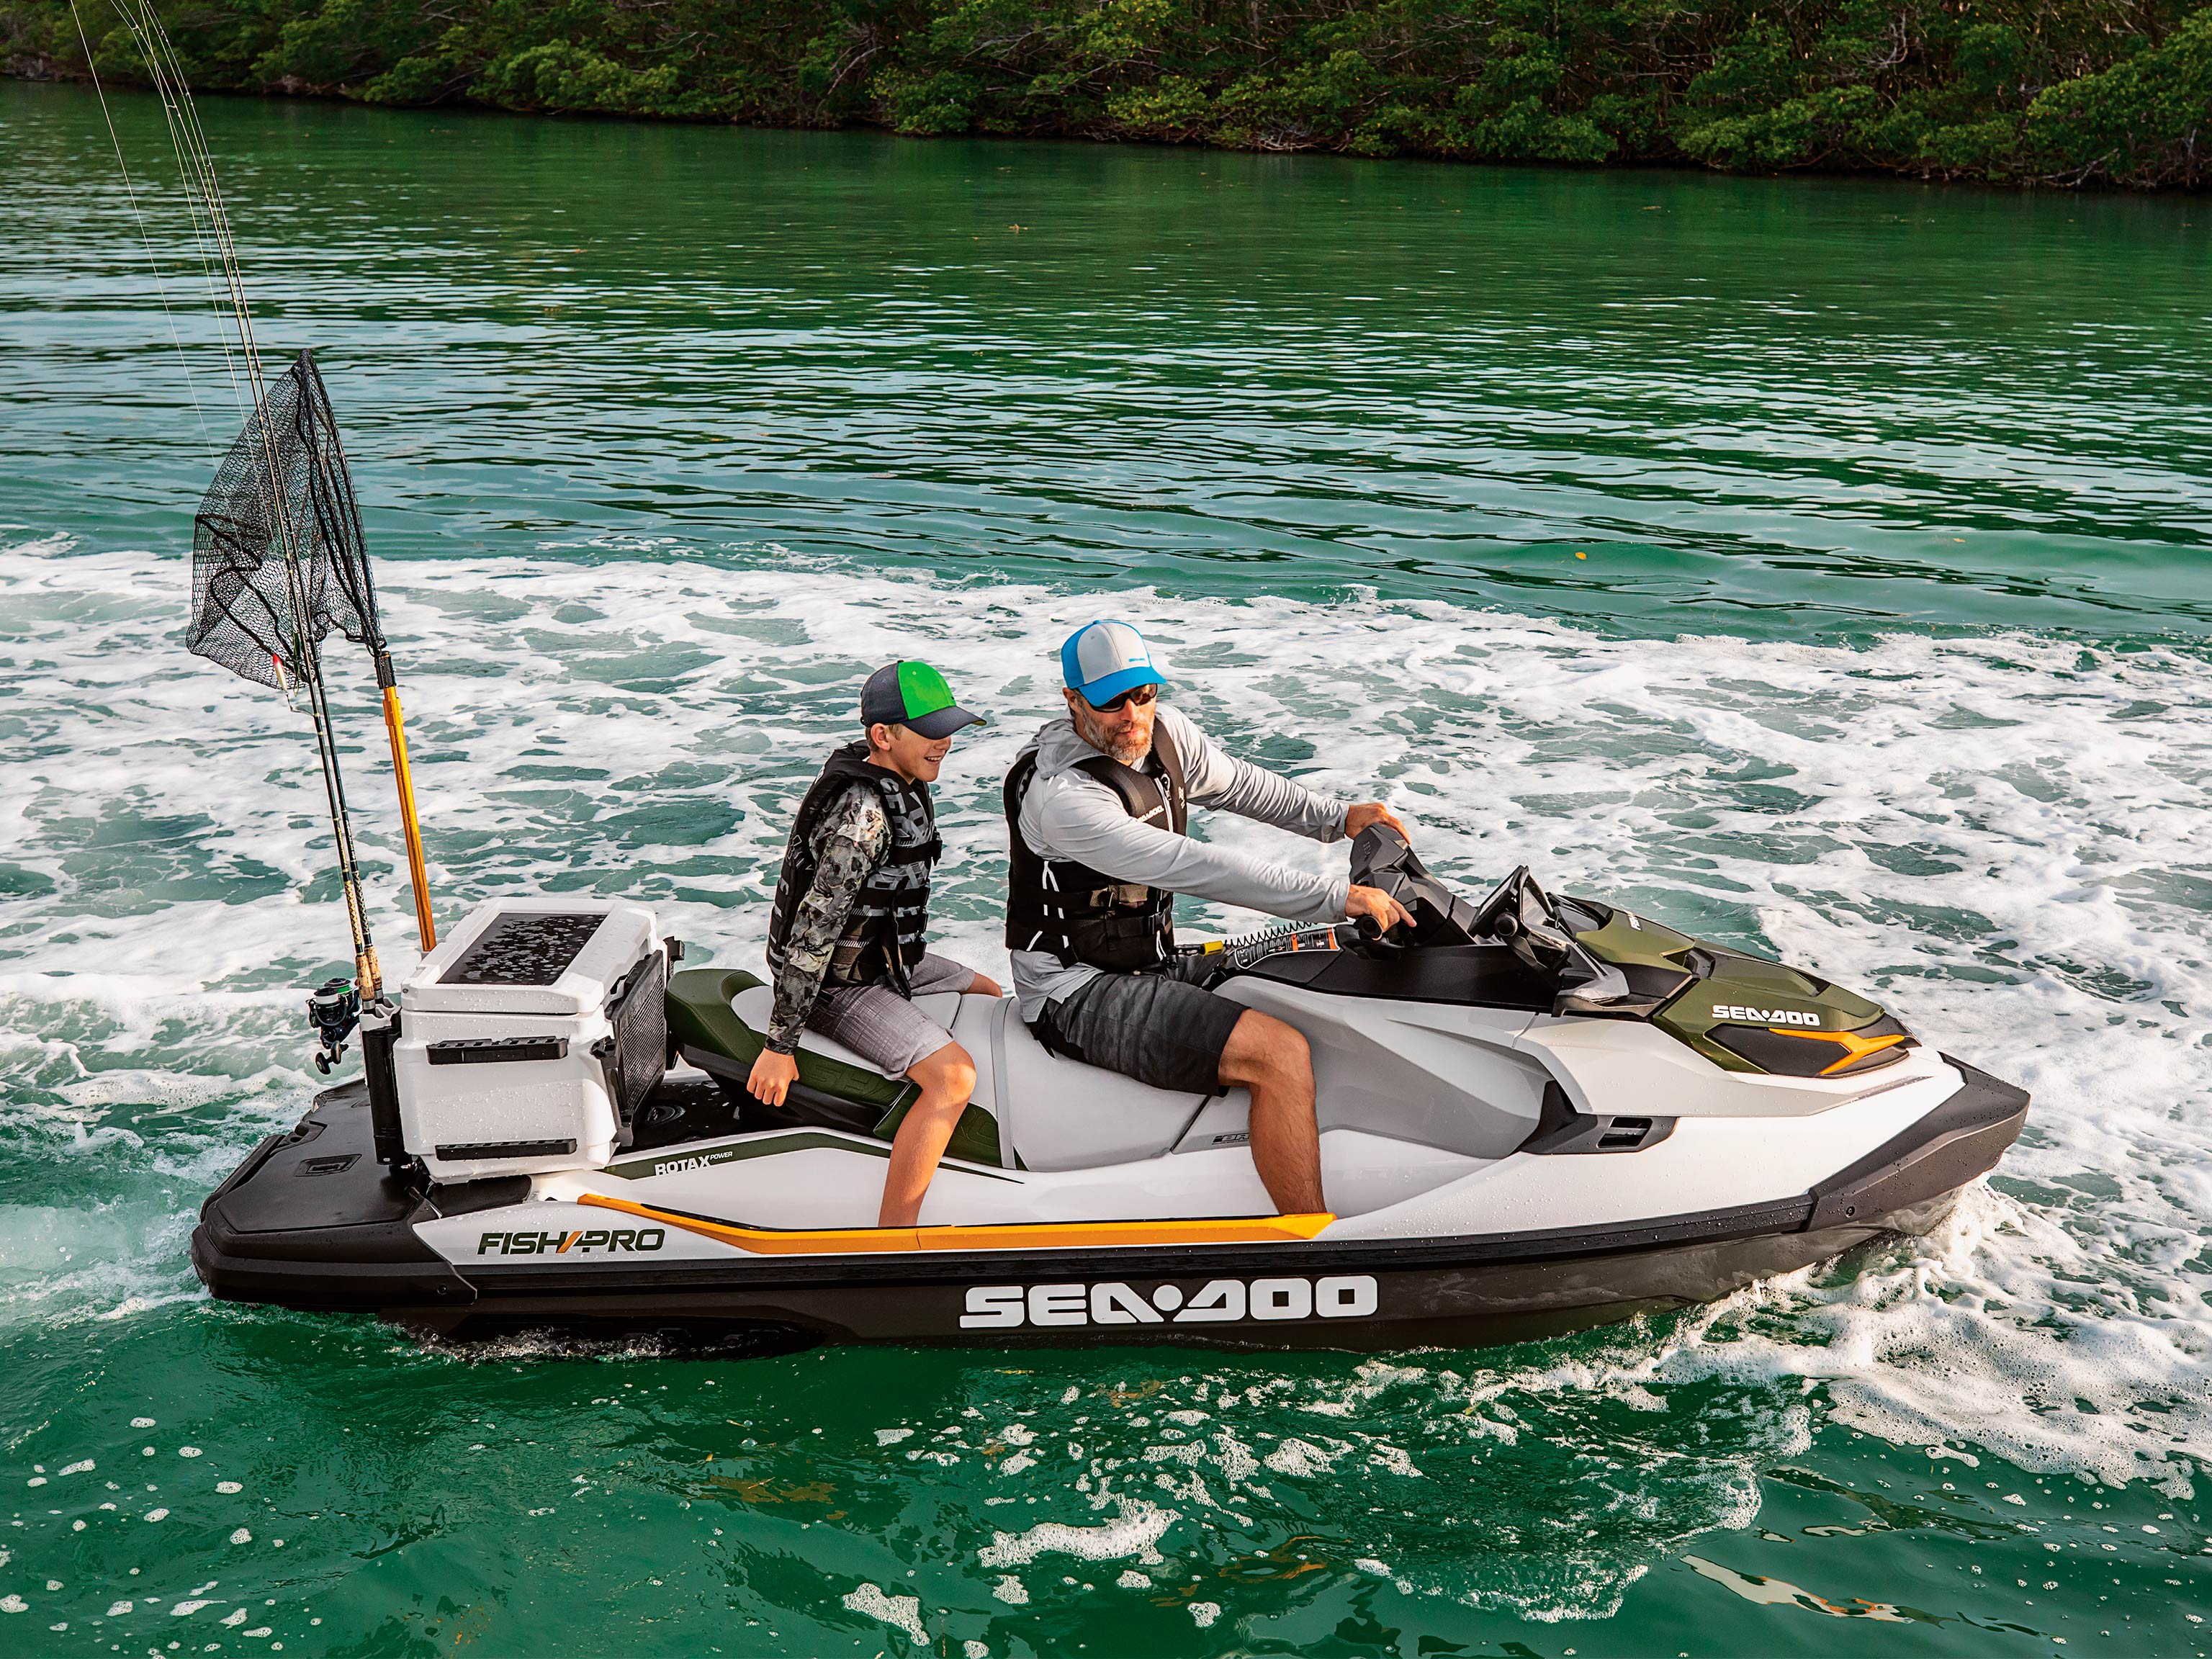 Father and son riding a Sea-Doo Fish Pro